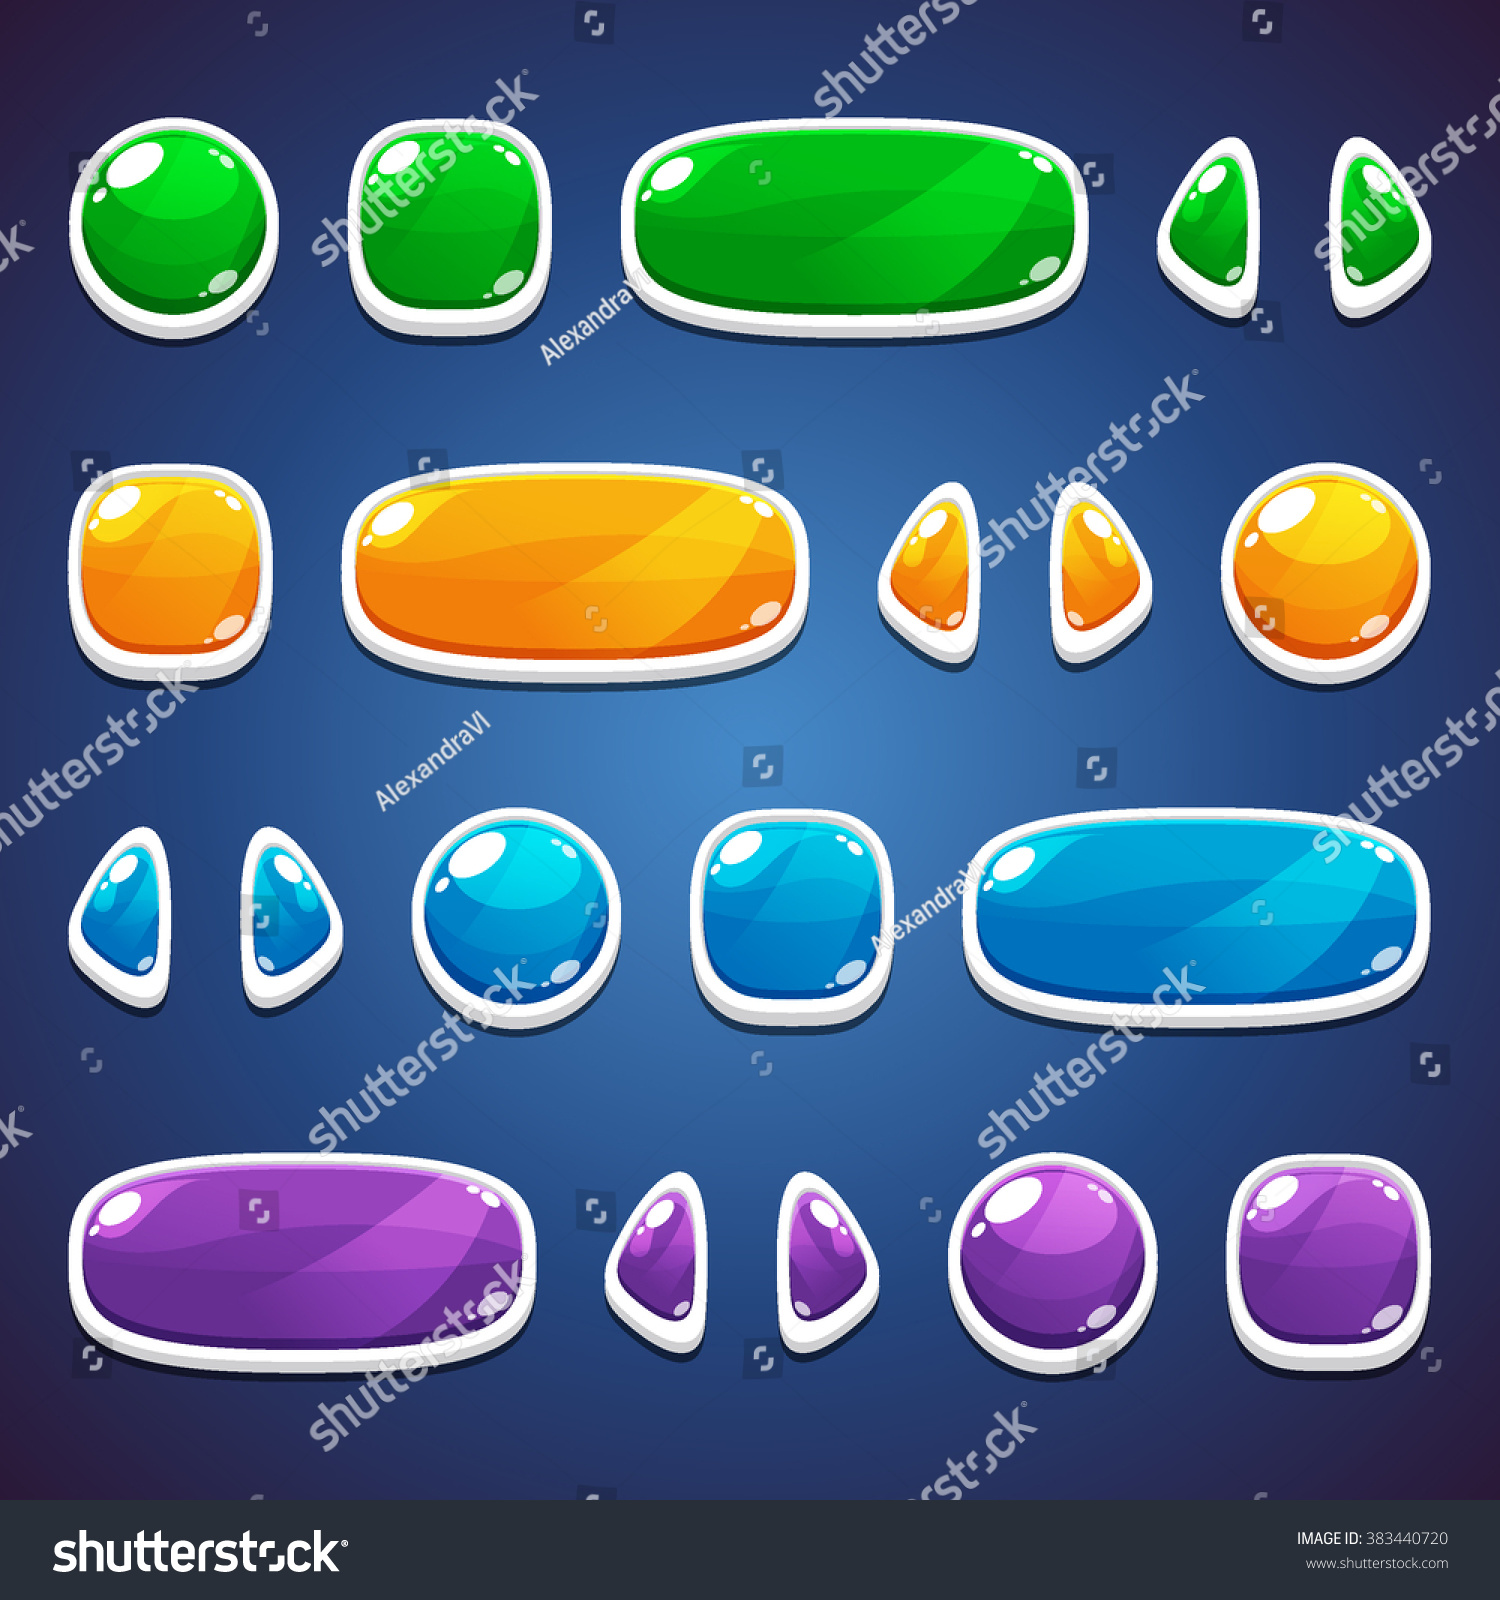 Big Set Of Colorful Cartoon Buttons Of Different Shapes For The User ...